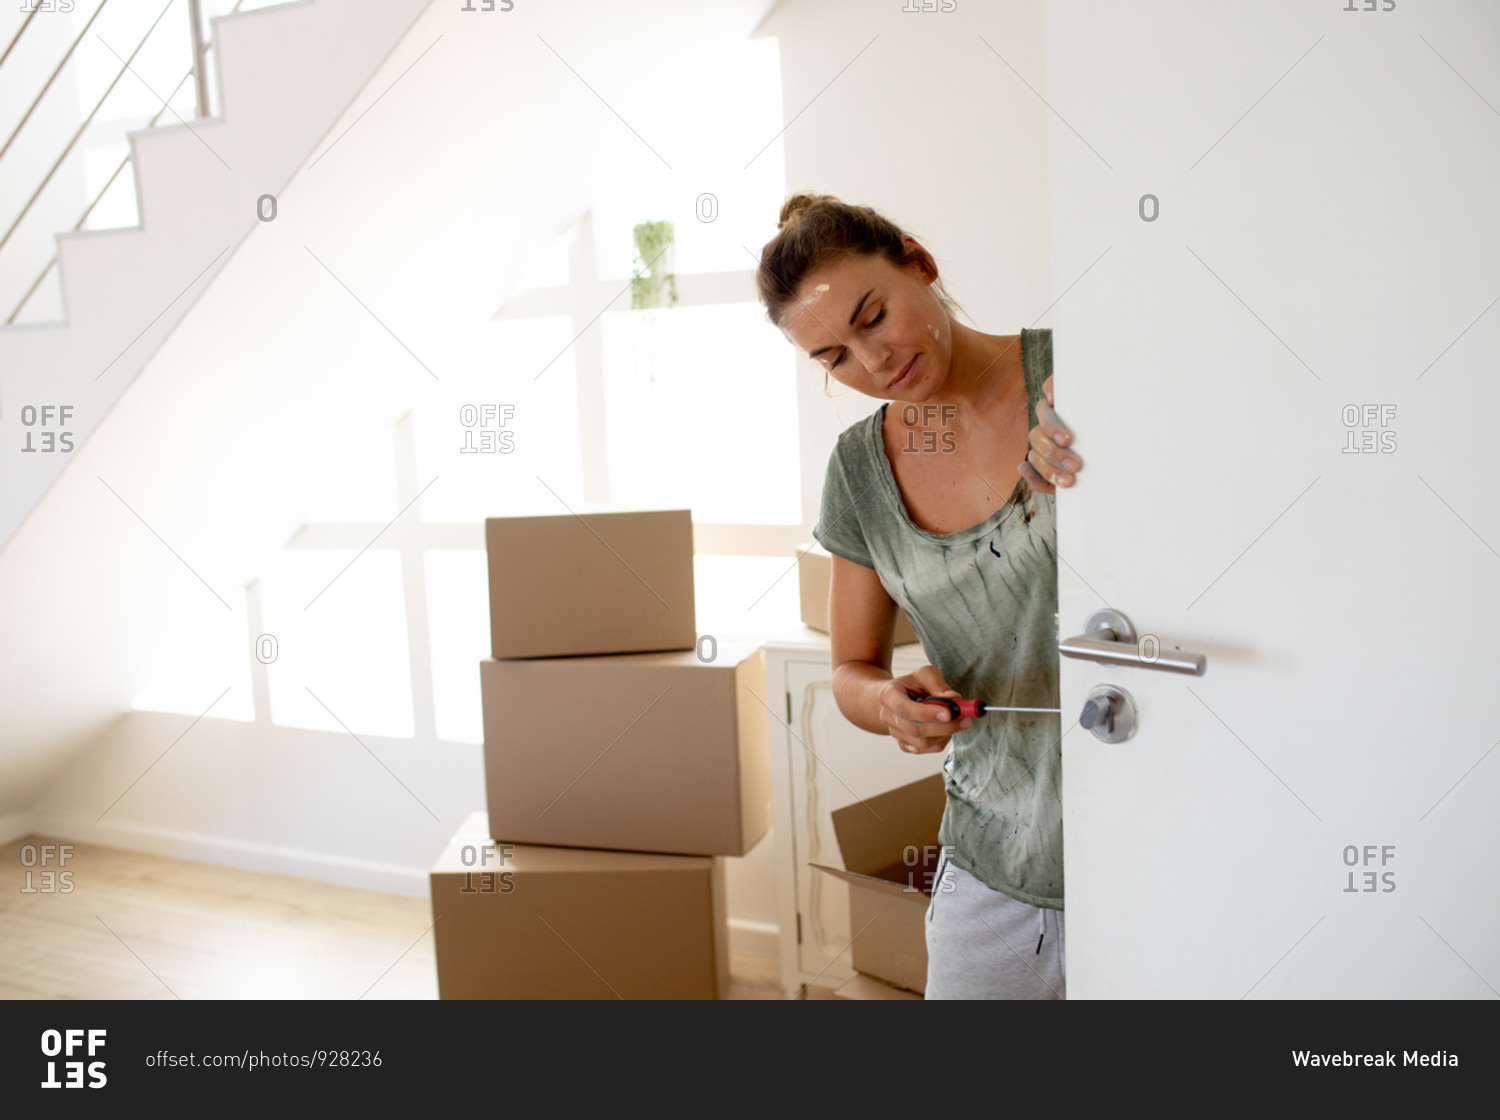 Caucasian woman spending time at home self isolating and social distancing in quarantine lockdown during coronavirus covid 19 epidemic, fixing the door while renovating her house.